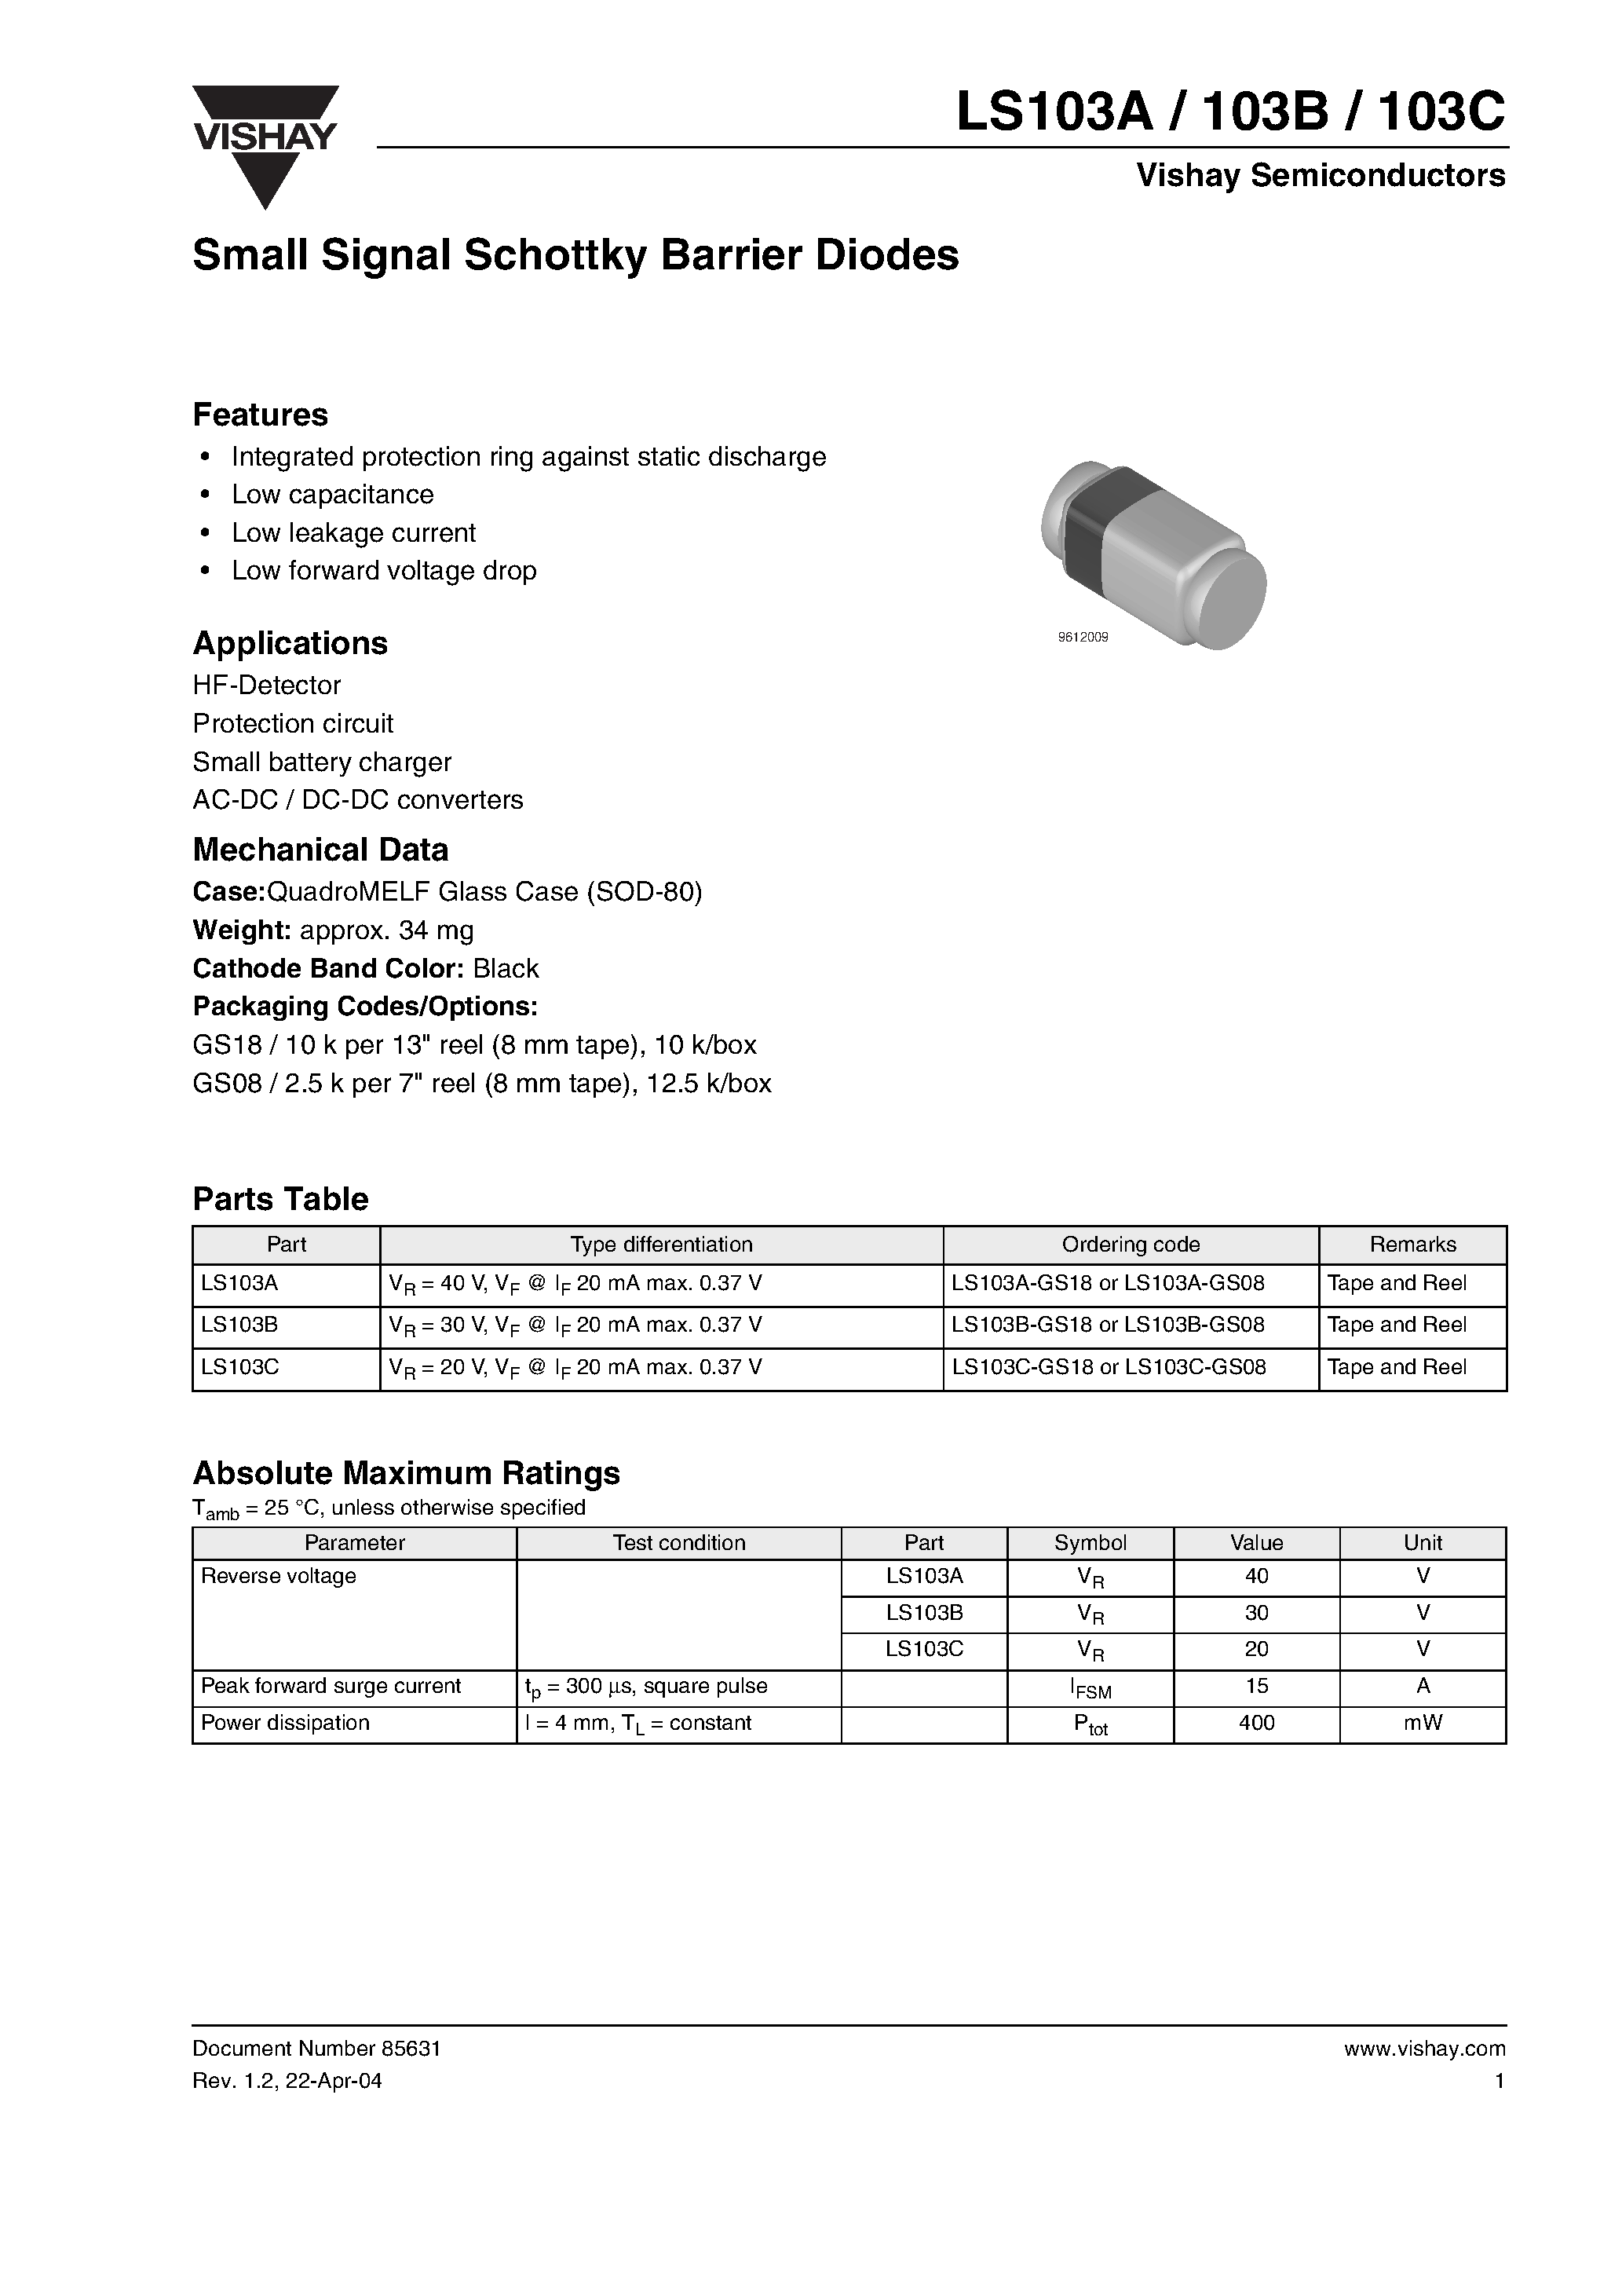 Datasheet LS103B-GS18 - Small Signal Schottky Barrier Diodes page 1